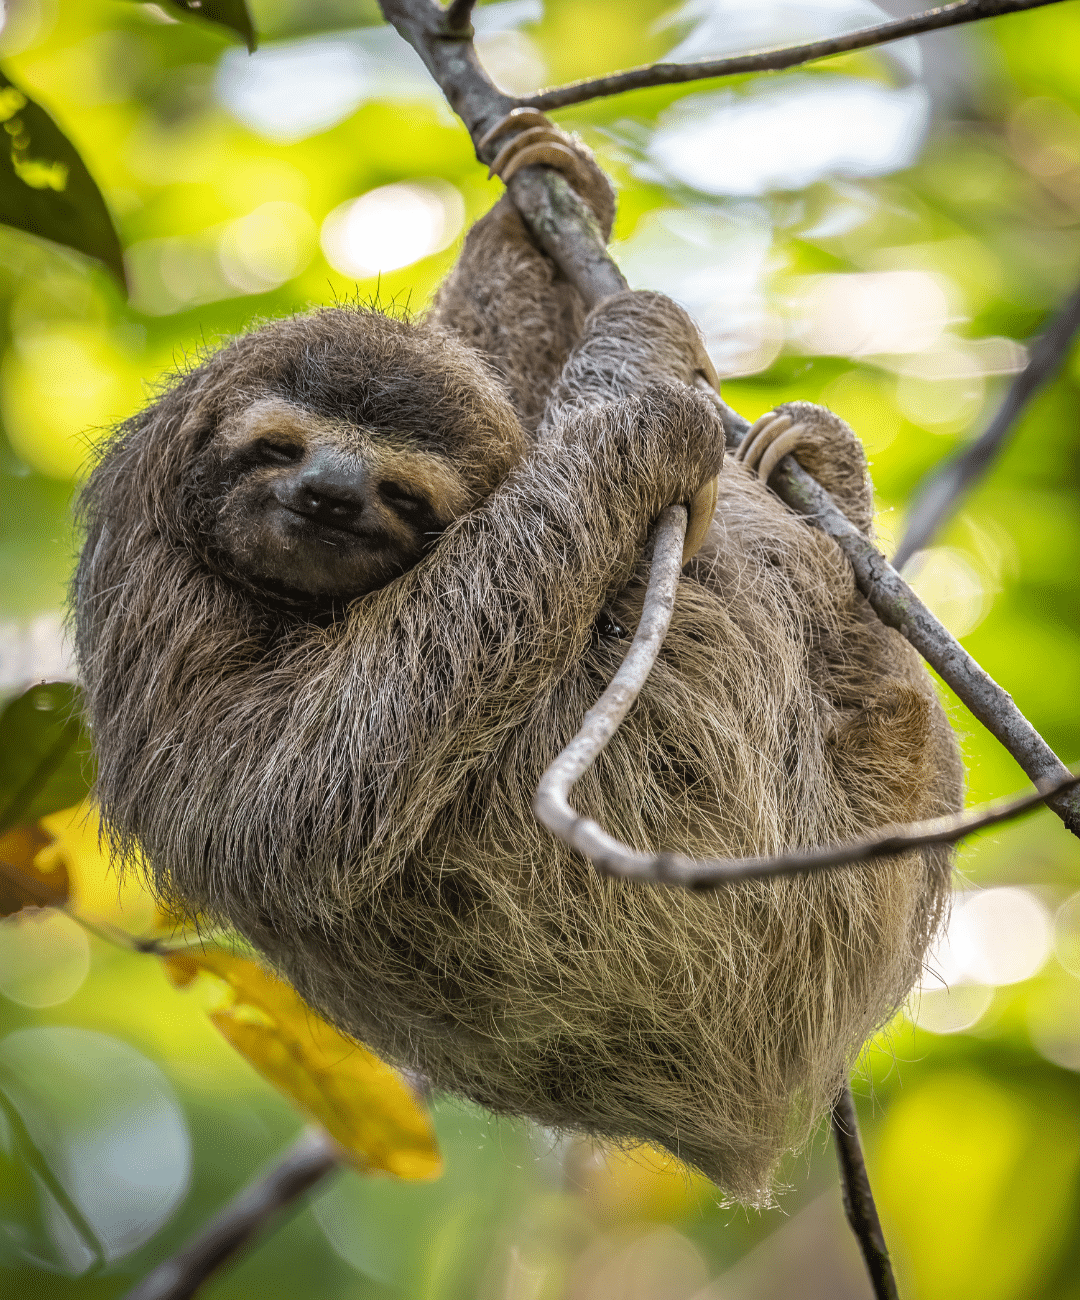 sloth hanging in tree - Costa Rica